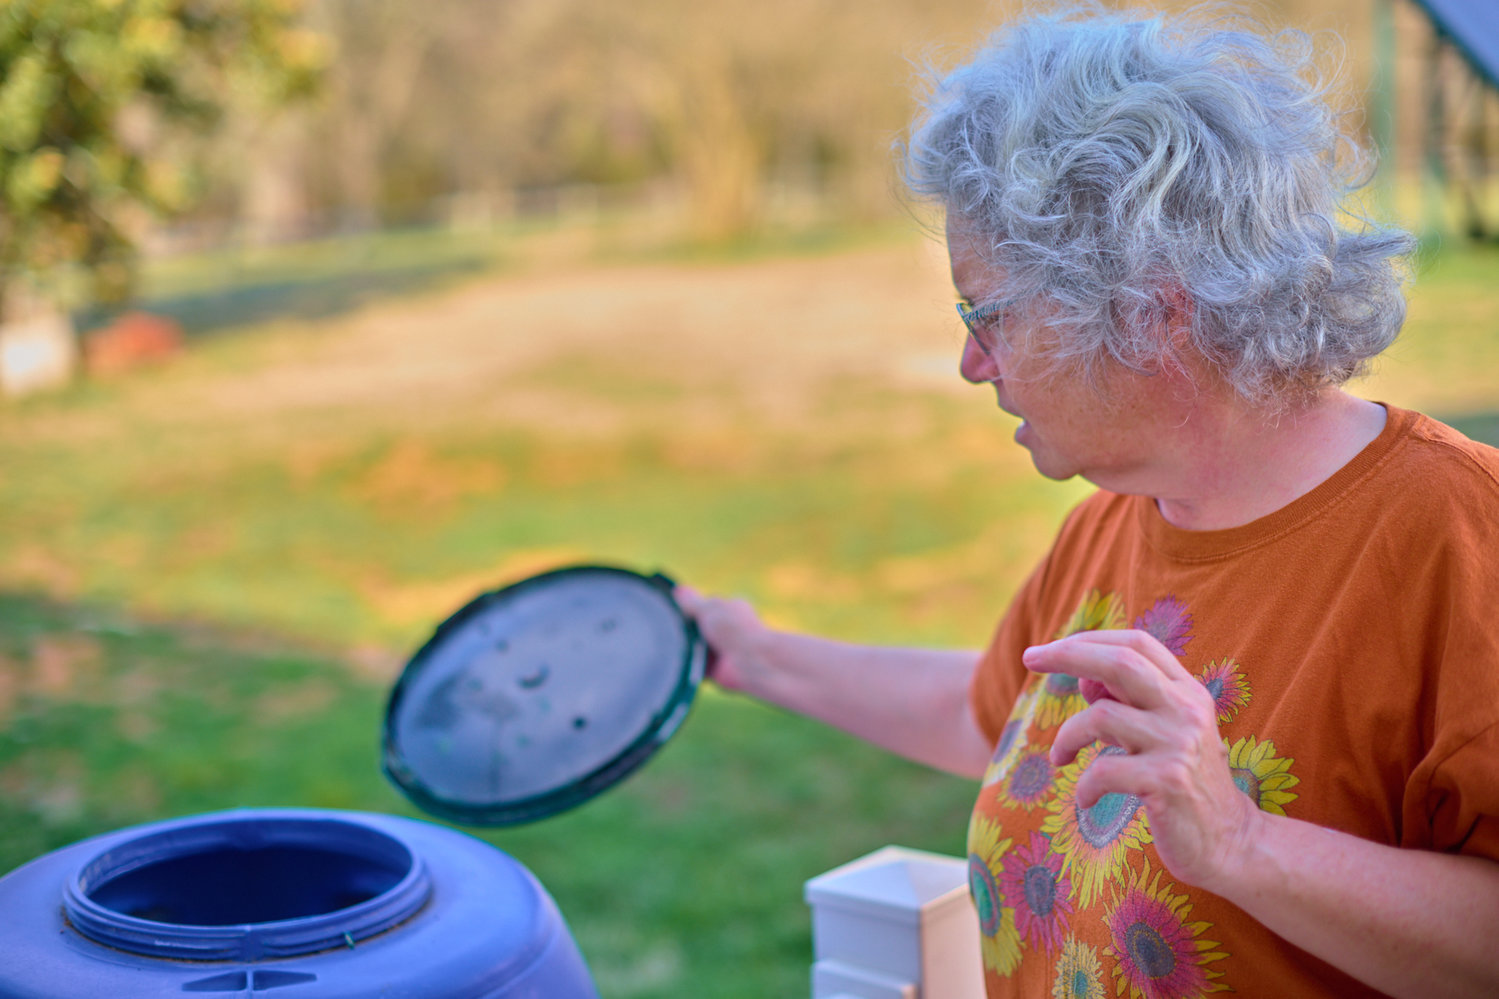 Nancy Van Camp, wife of Dr. John Dykers, shows one of their 55-gallon drums they use to store their urine. The Siler City couple hope to use the bodily fluid as fertilizer for their farm.